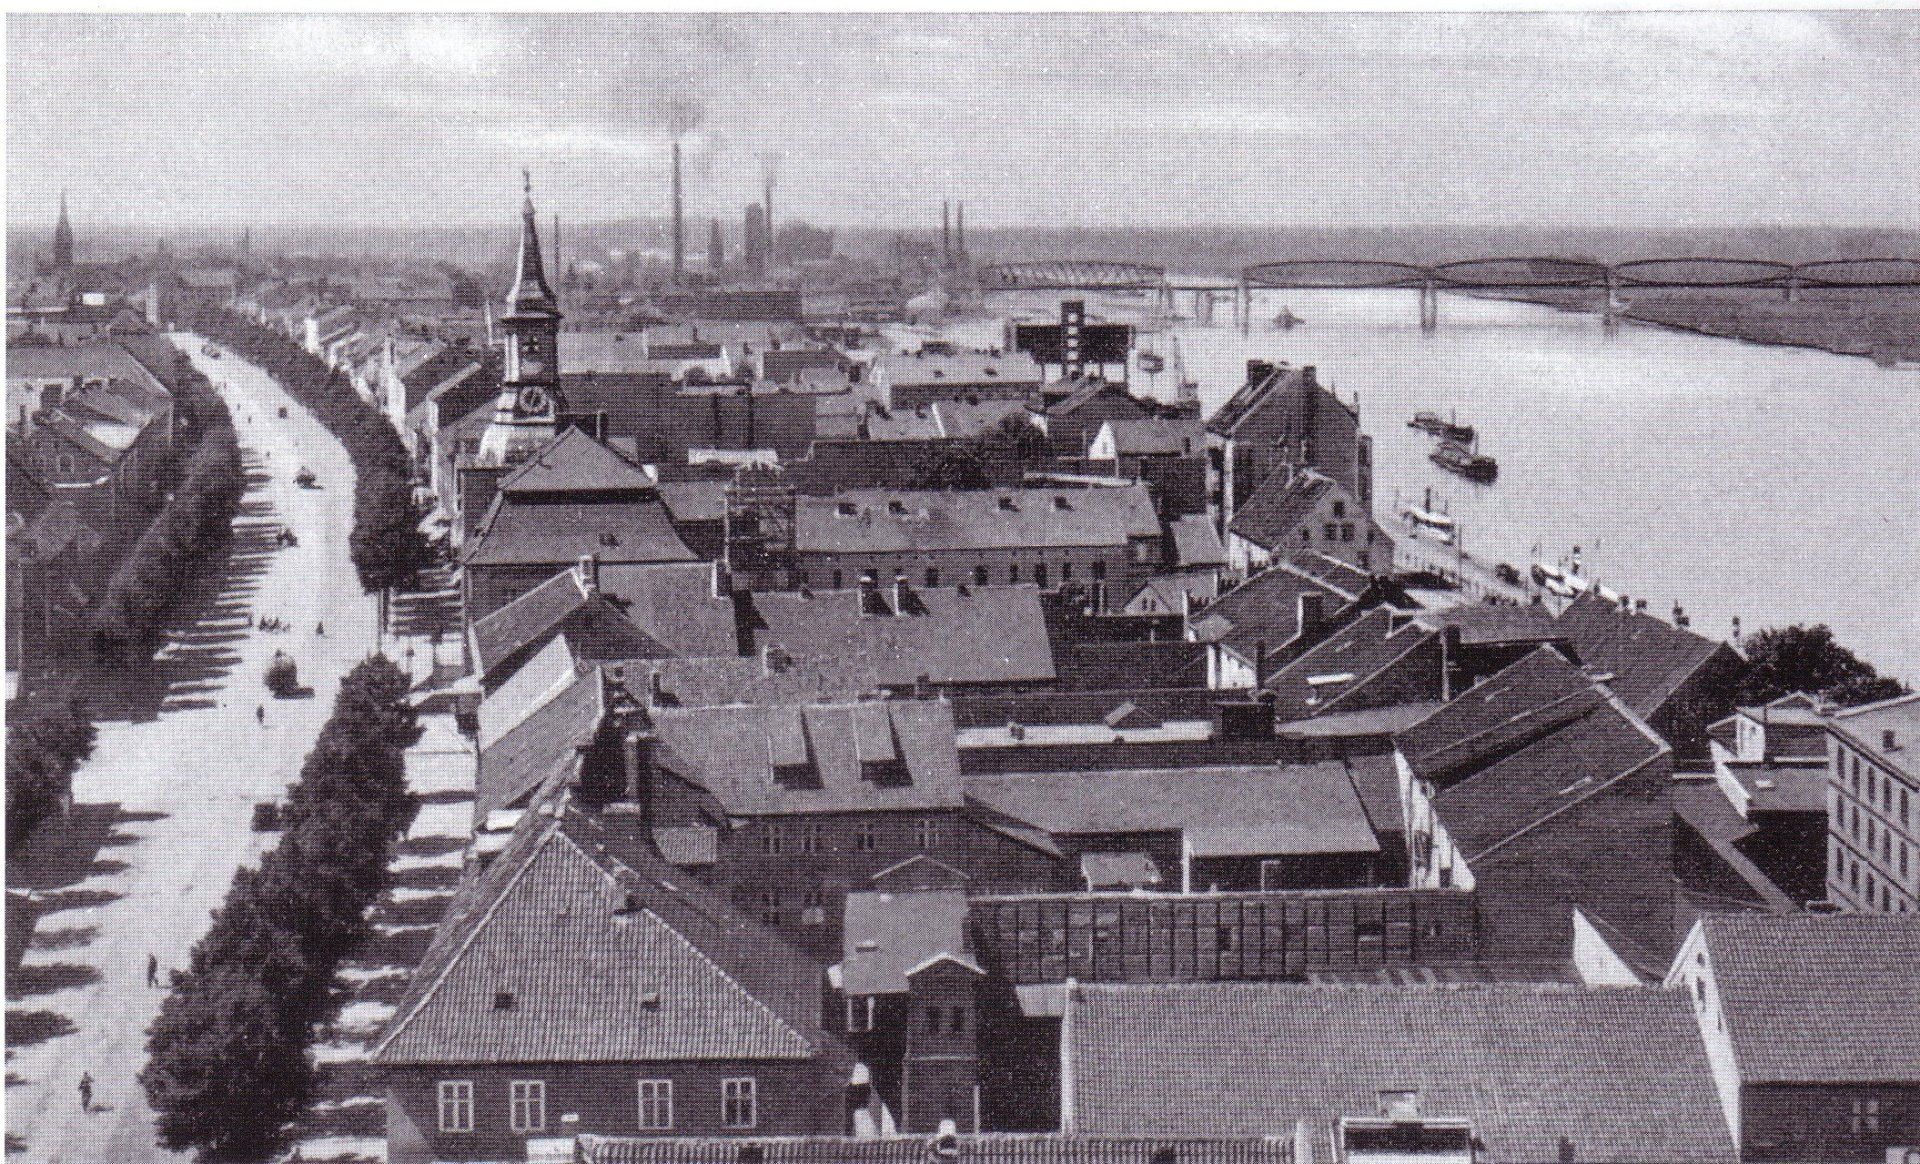 The City of Tilsit, East Prussia in the early 1900s